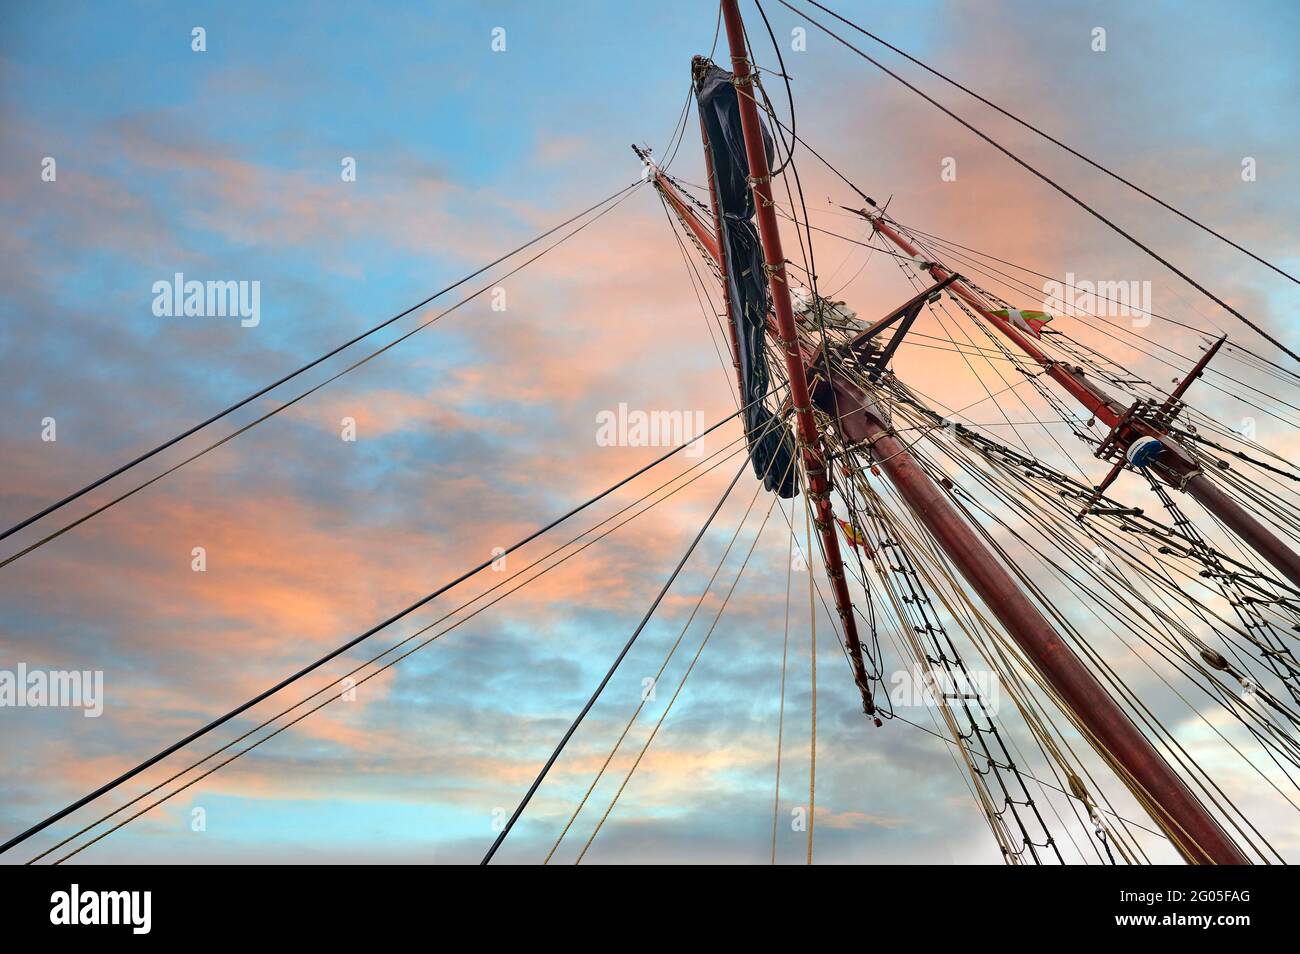 Mast and rigging on board of the tall ship Stock Photo